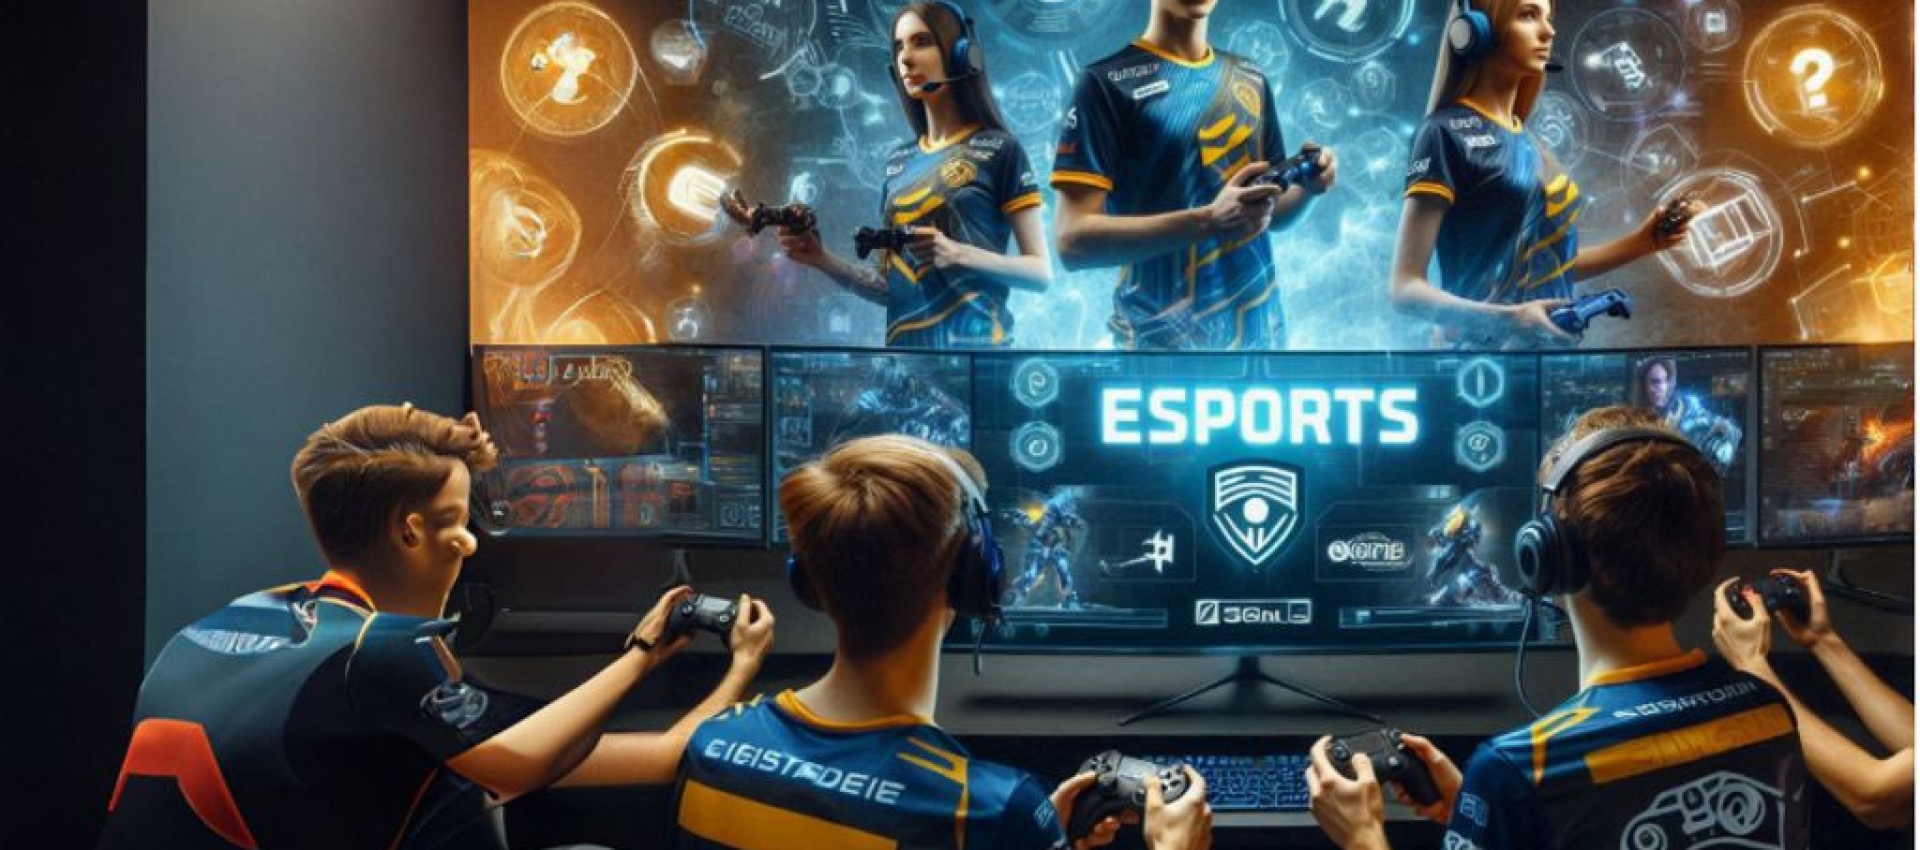 Why Esports are Regular Sports and other Issues